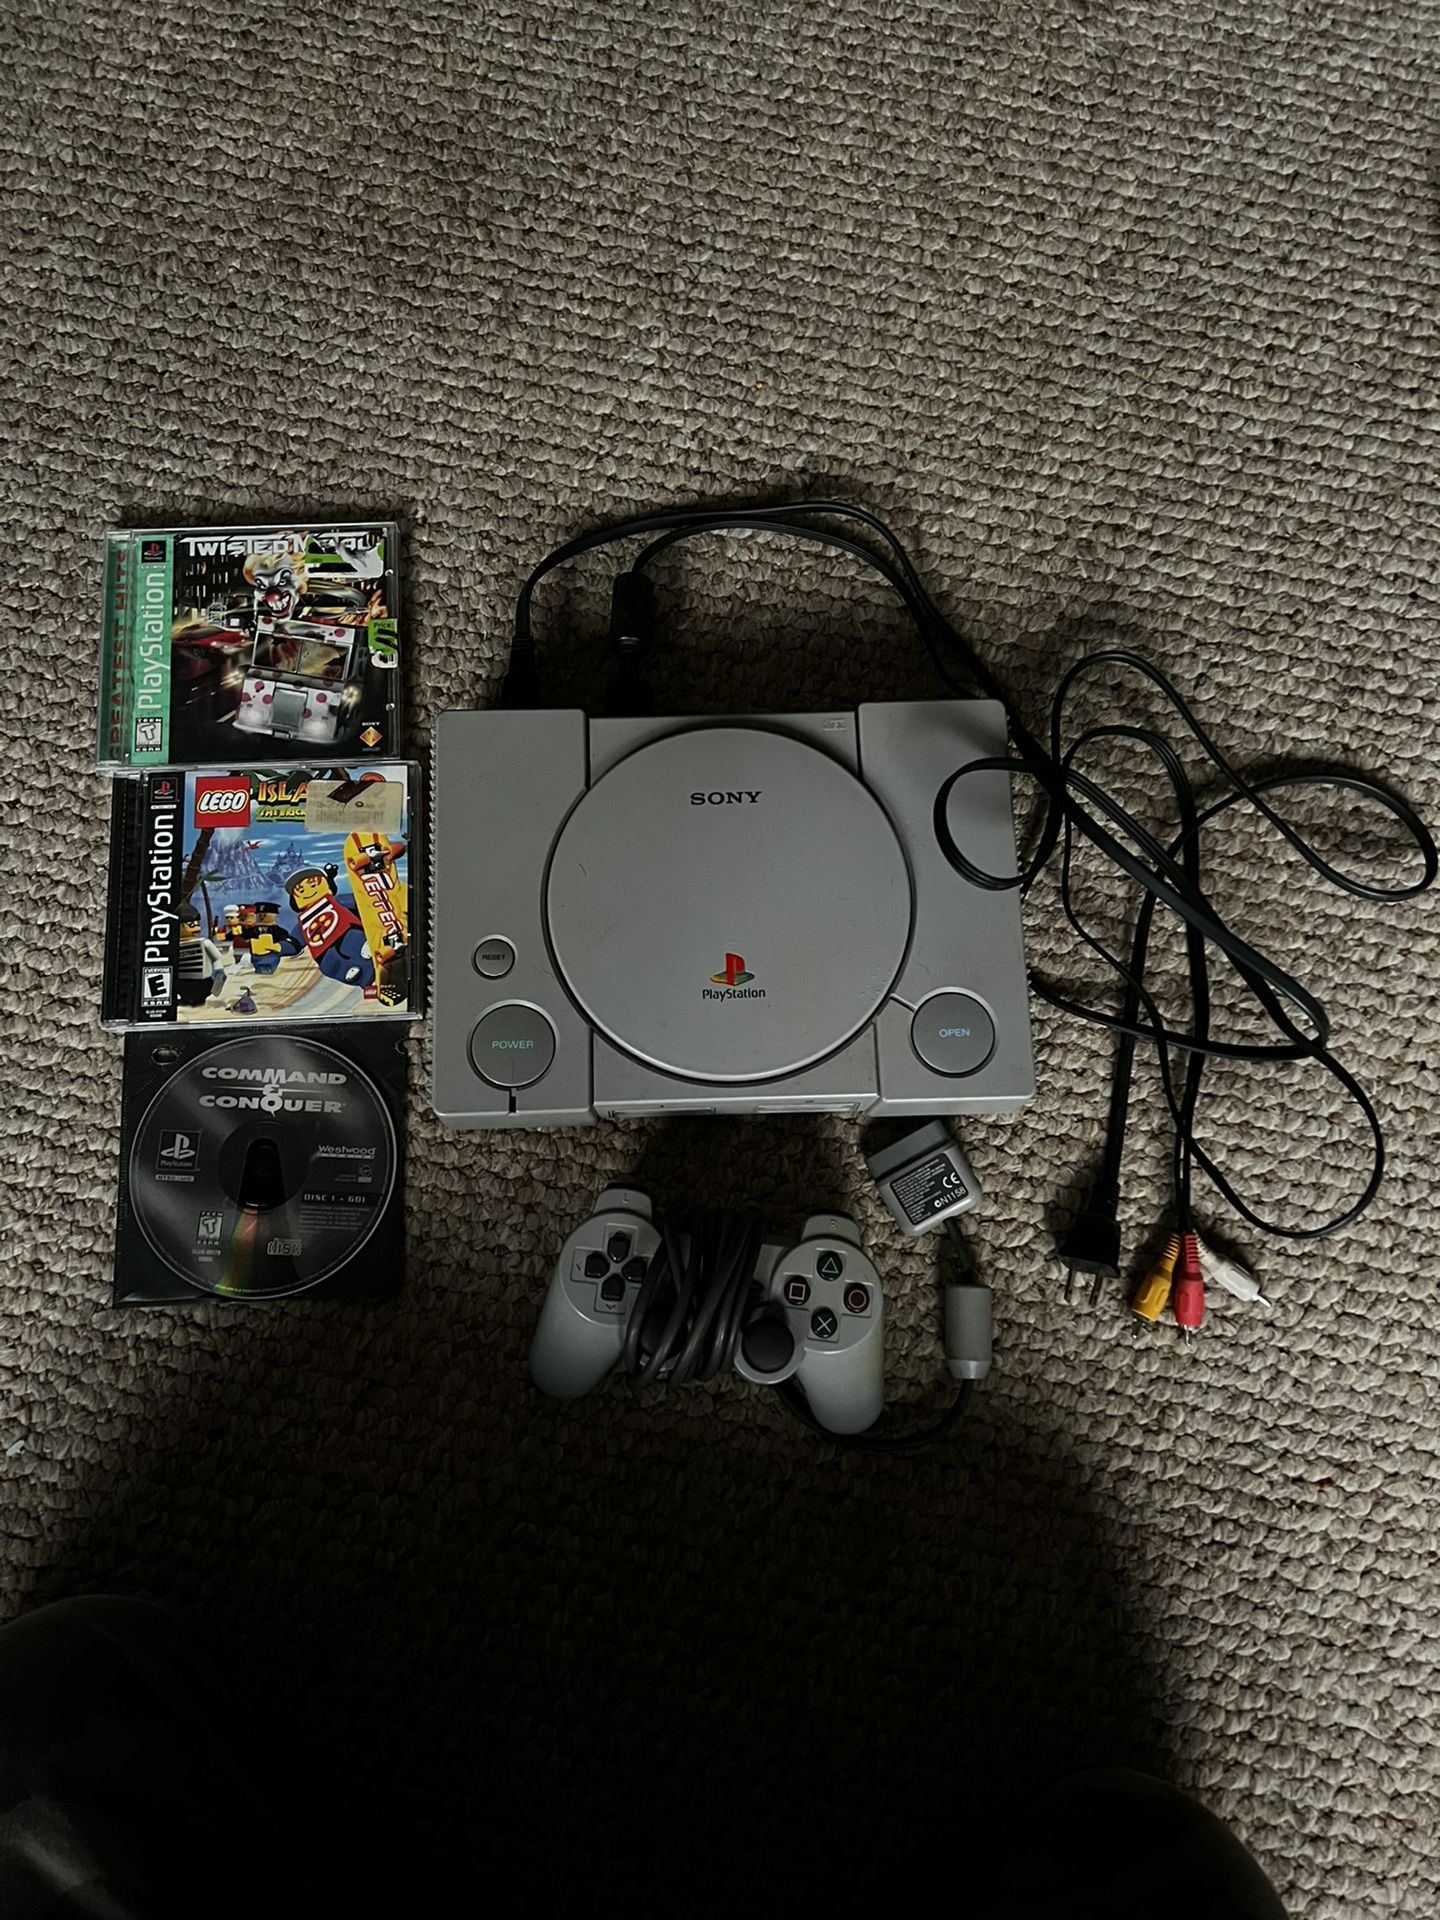 Sony PlayStation One With 3 Games!